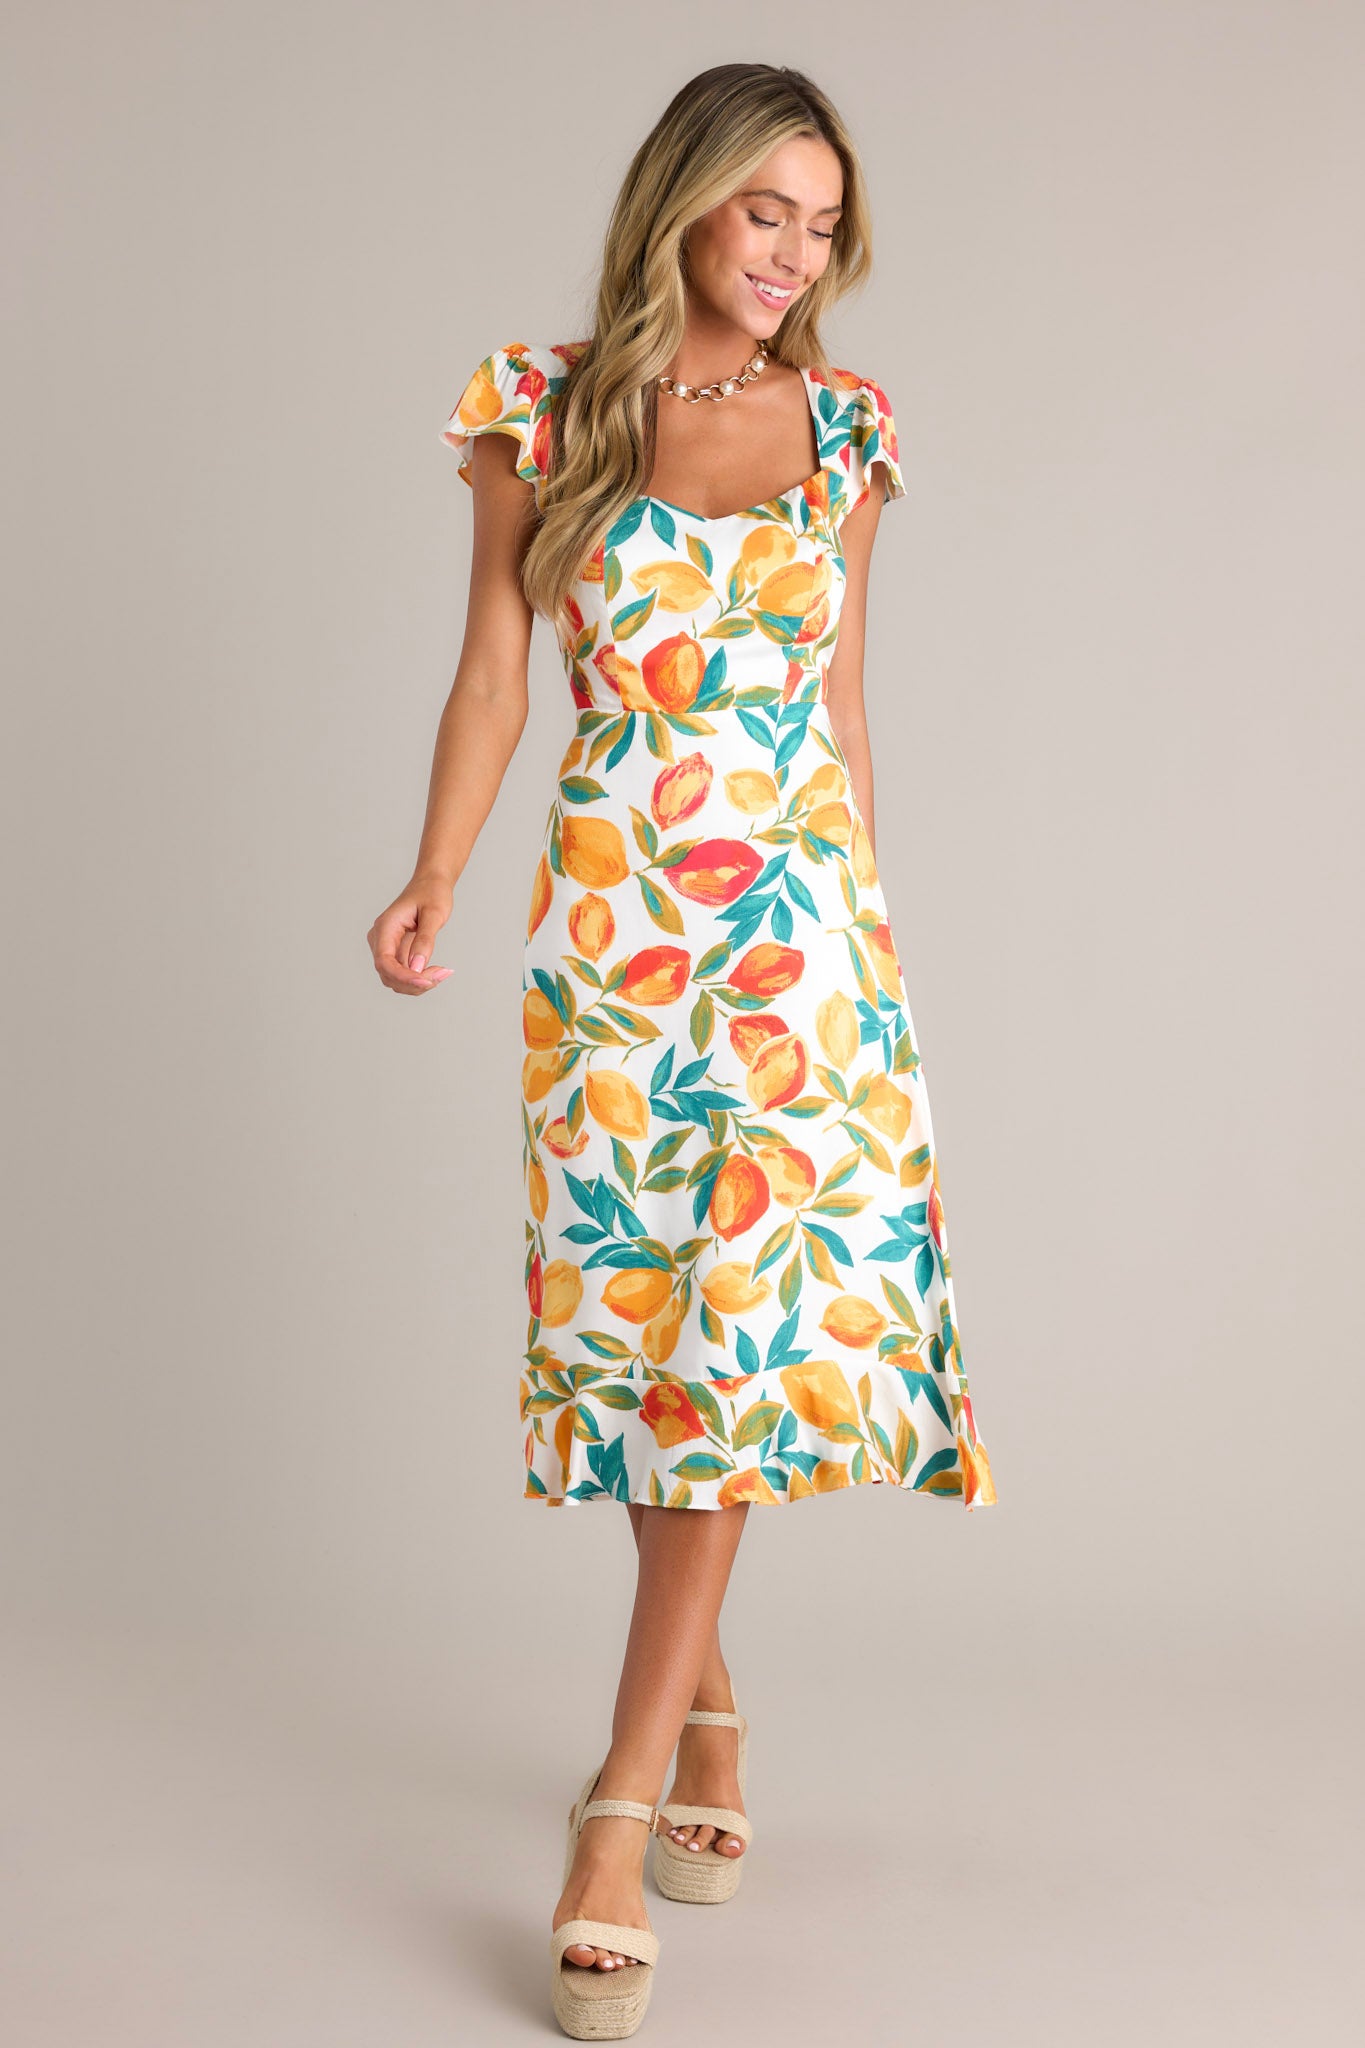 Action shot of an ivory dress displaying the fit and movement, highlighting the v-neckline, citrus print, ruffled hemline, and short flutter sleeves.